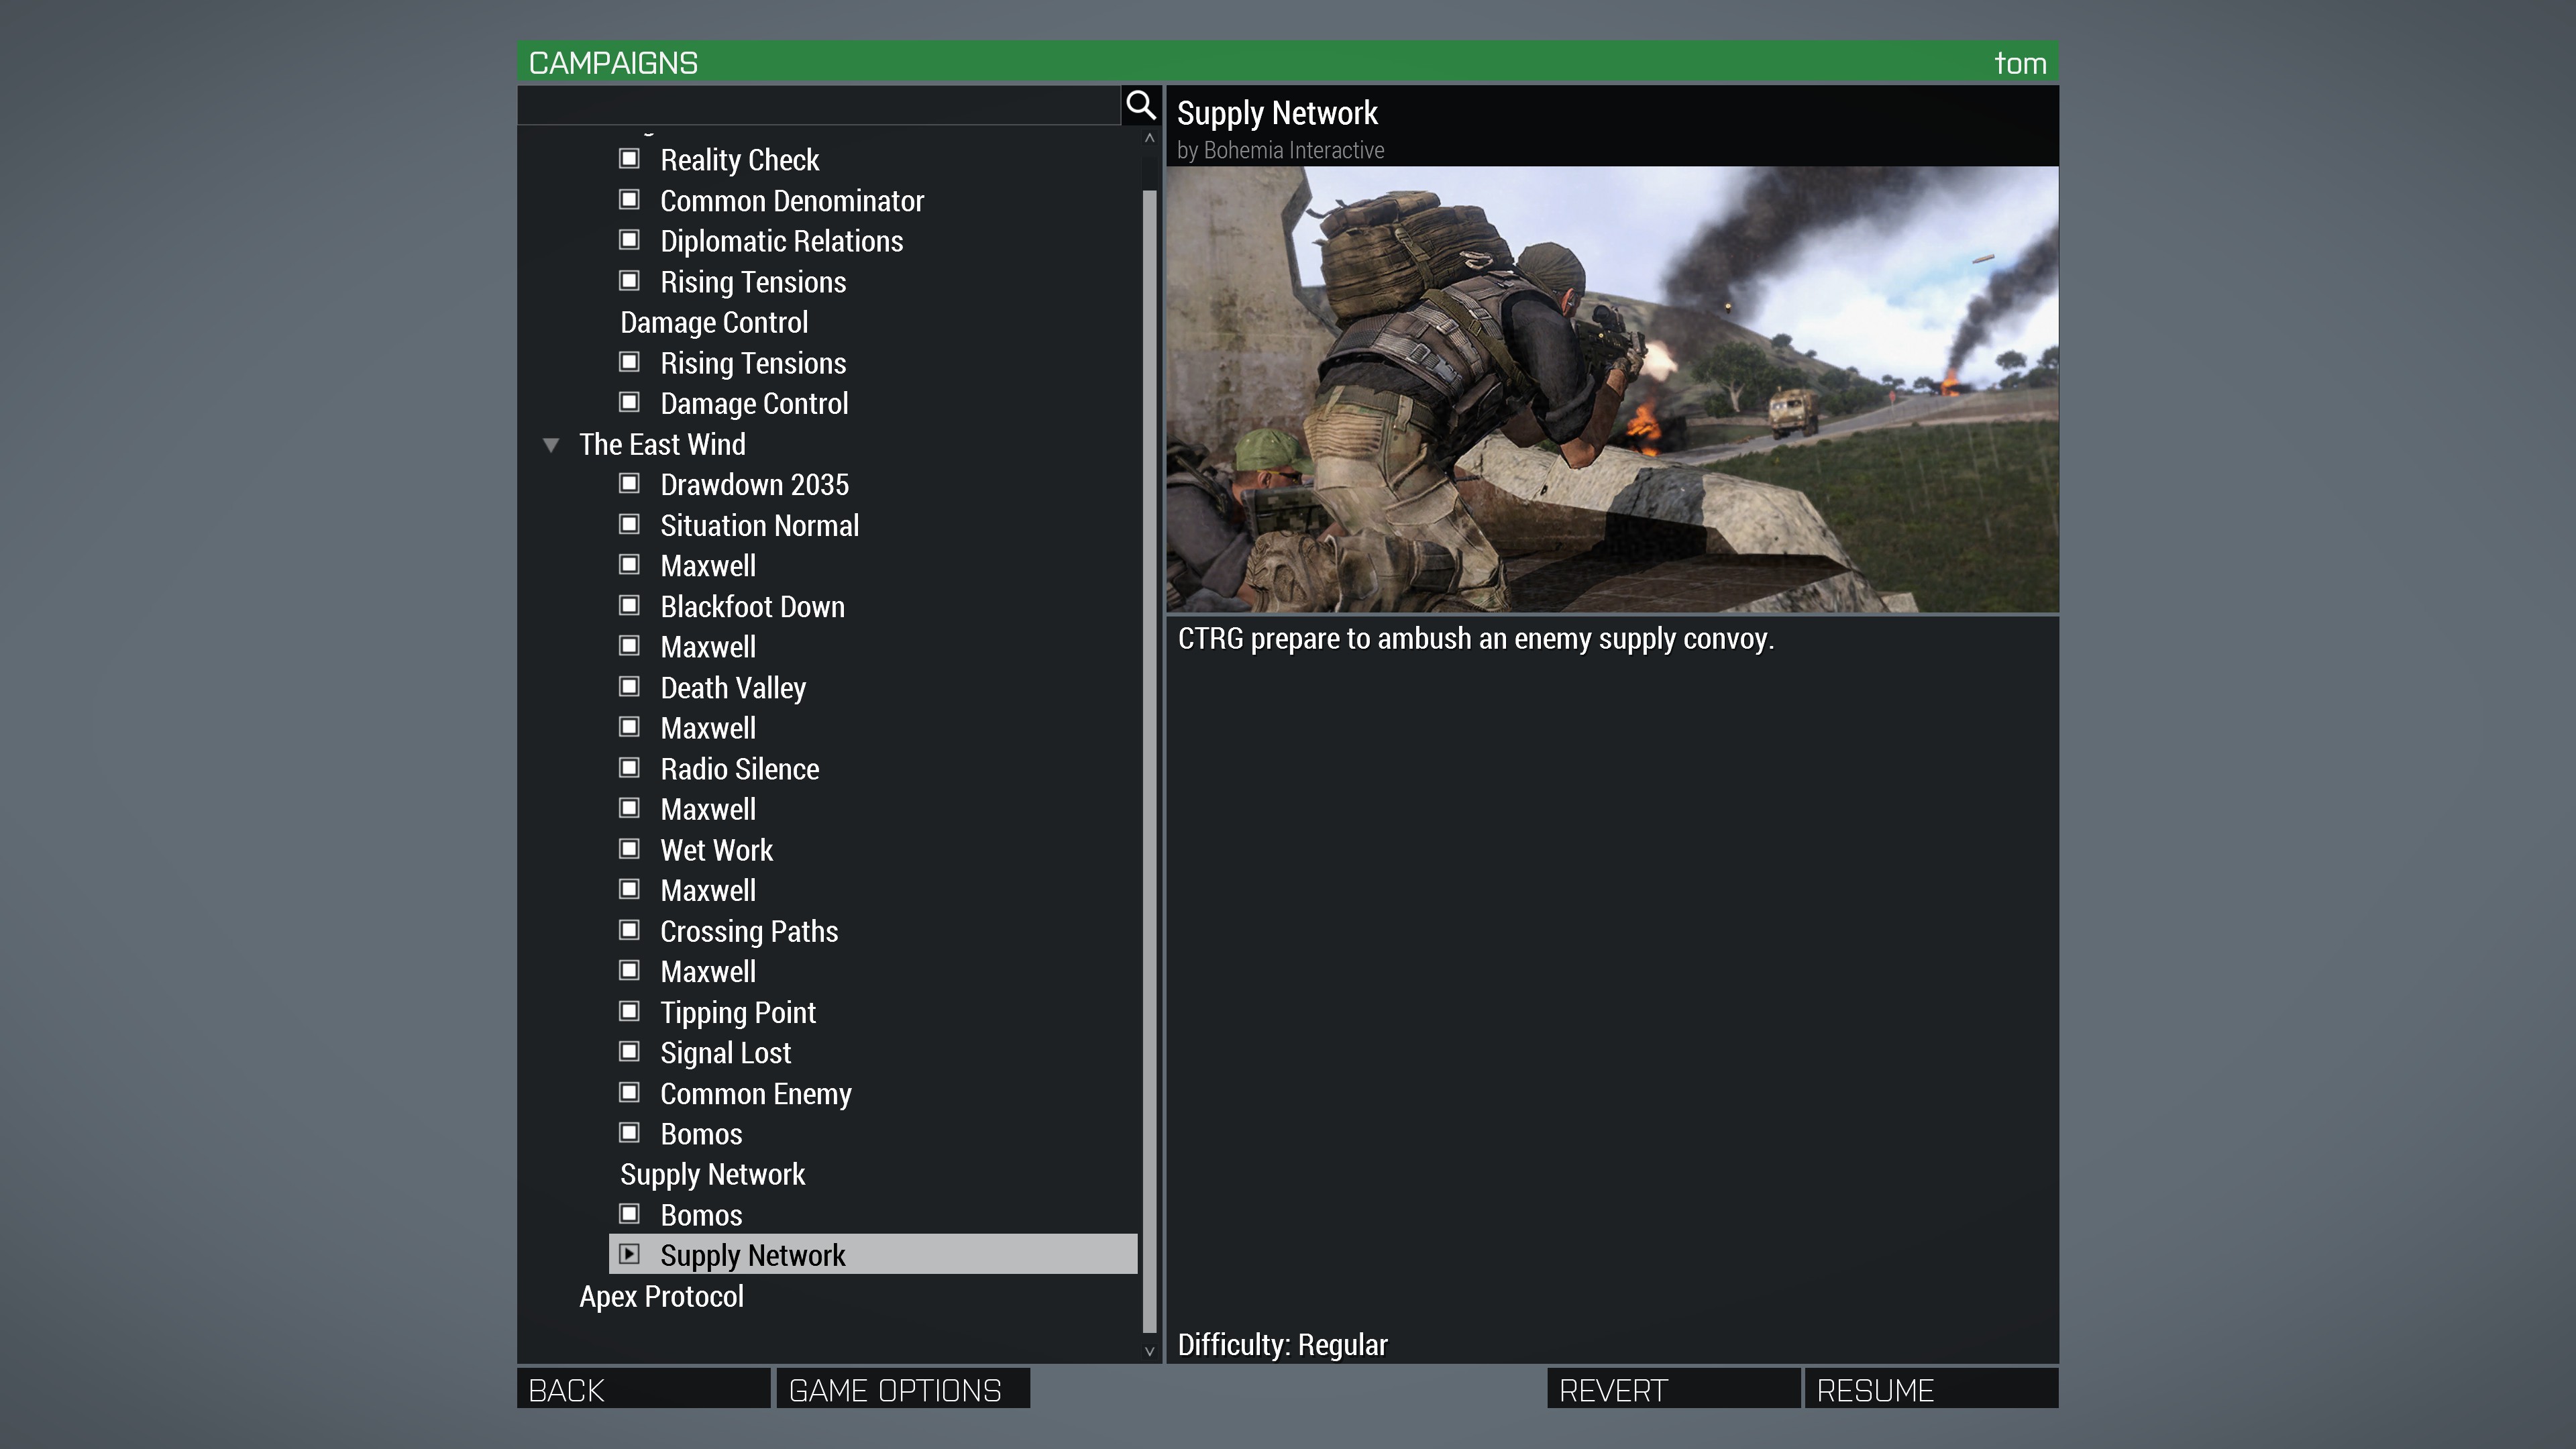 T Arma 3 Single Player Campaigns Lists Duplicate Campaigns